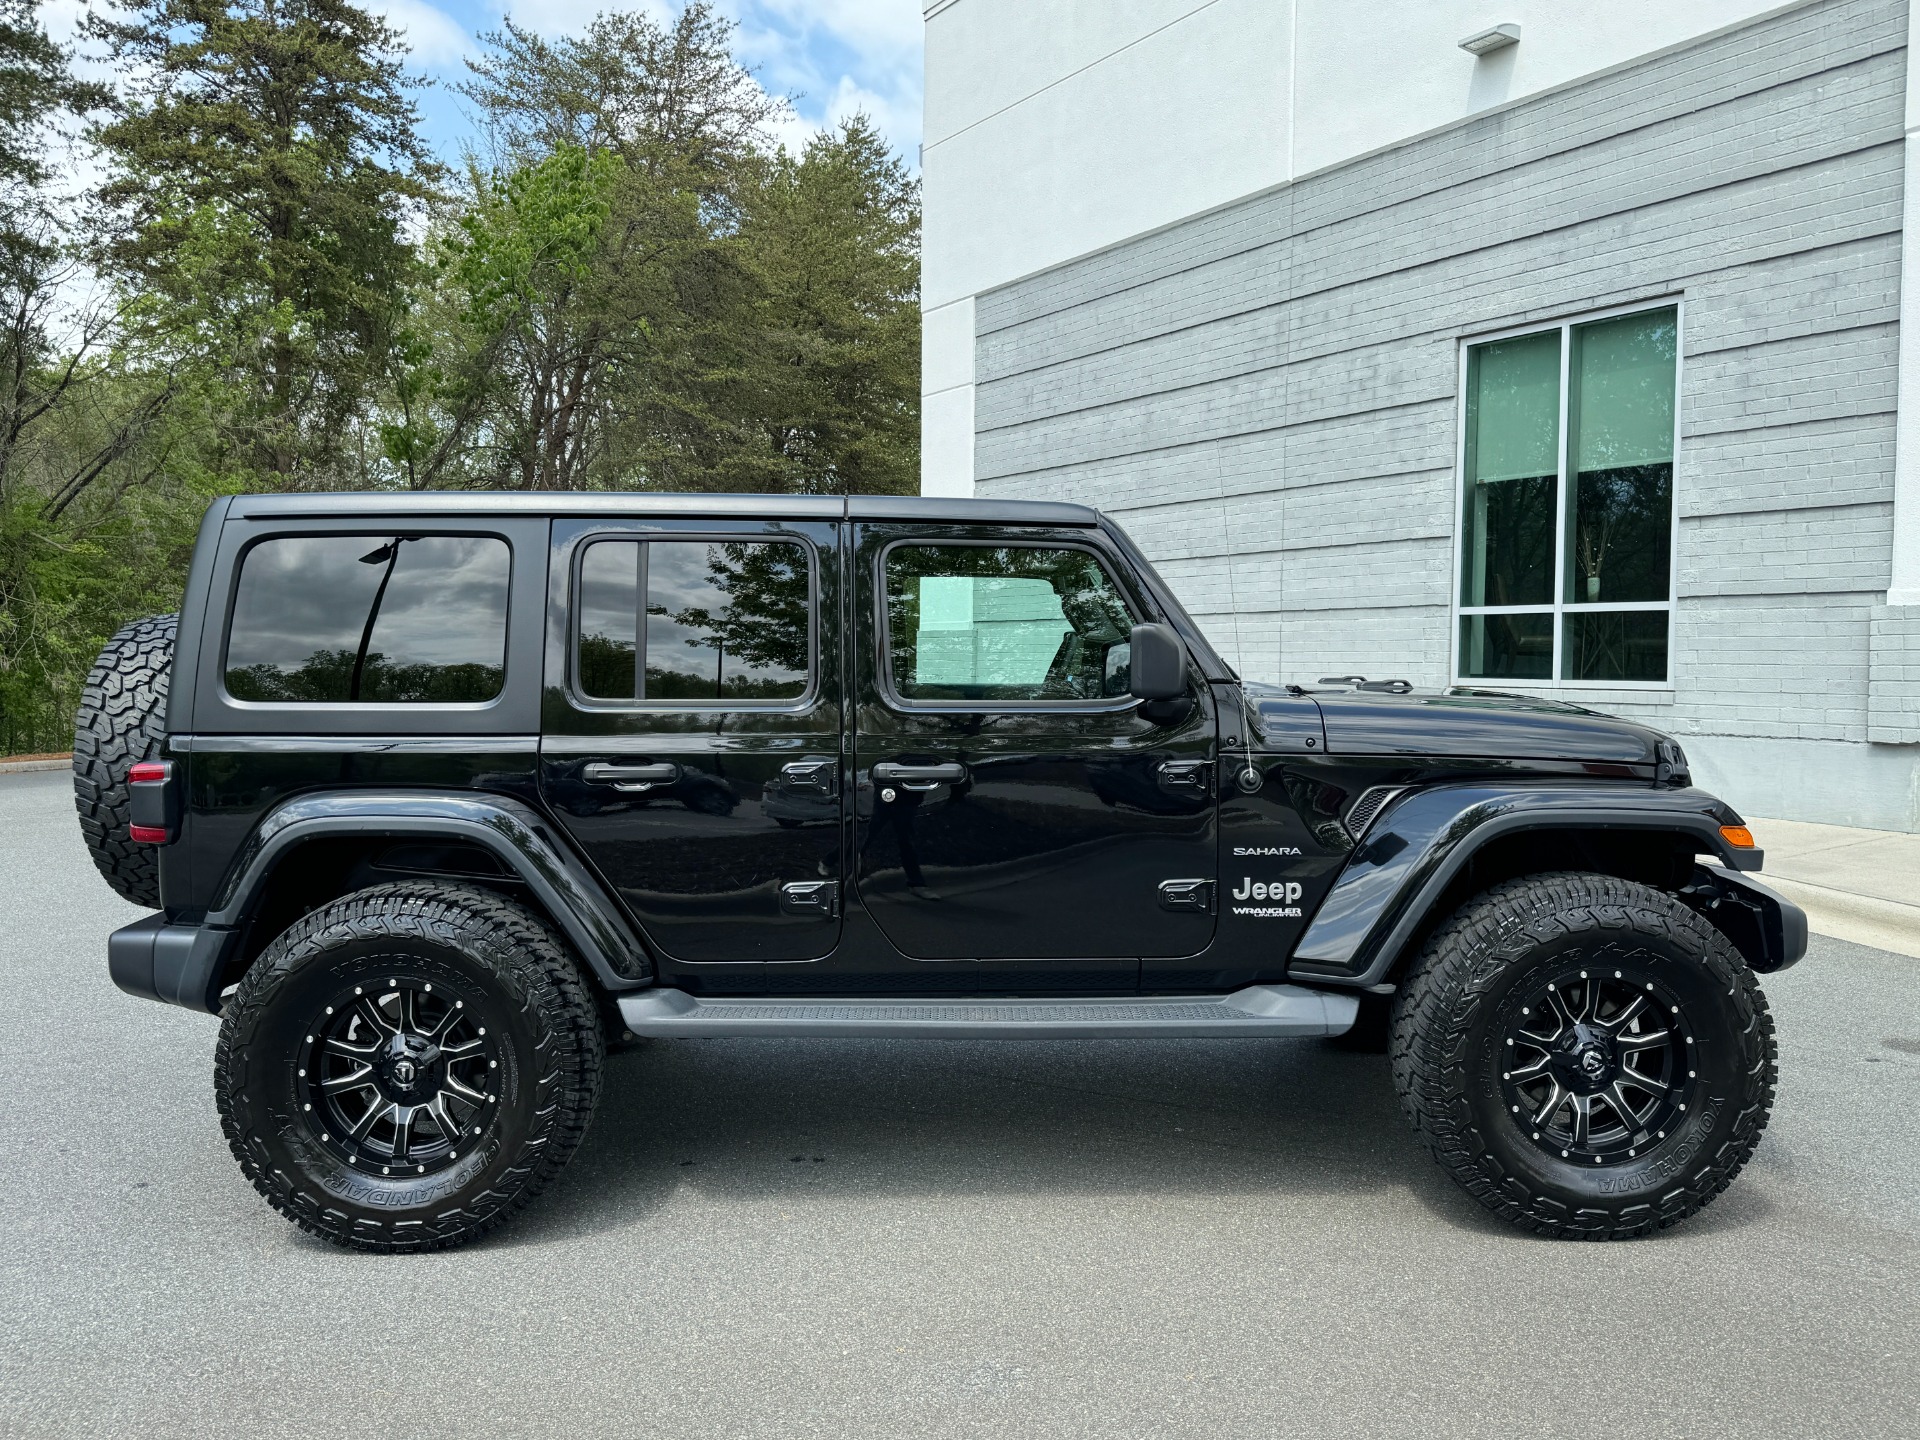 Used 2018 Jeep WRANGLER UNLIMITED SAHARA 4X4 / MANUAL / NAV / ALPINE / FREEDOM TOP / REARVIEW for sale Sold at Formula Imports in Charlotte NC 28227 14